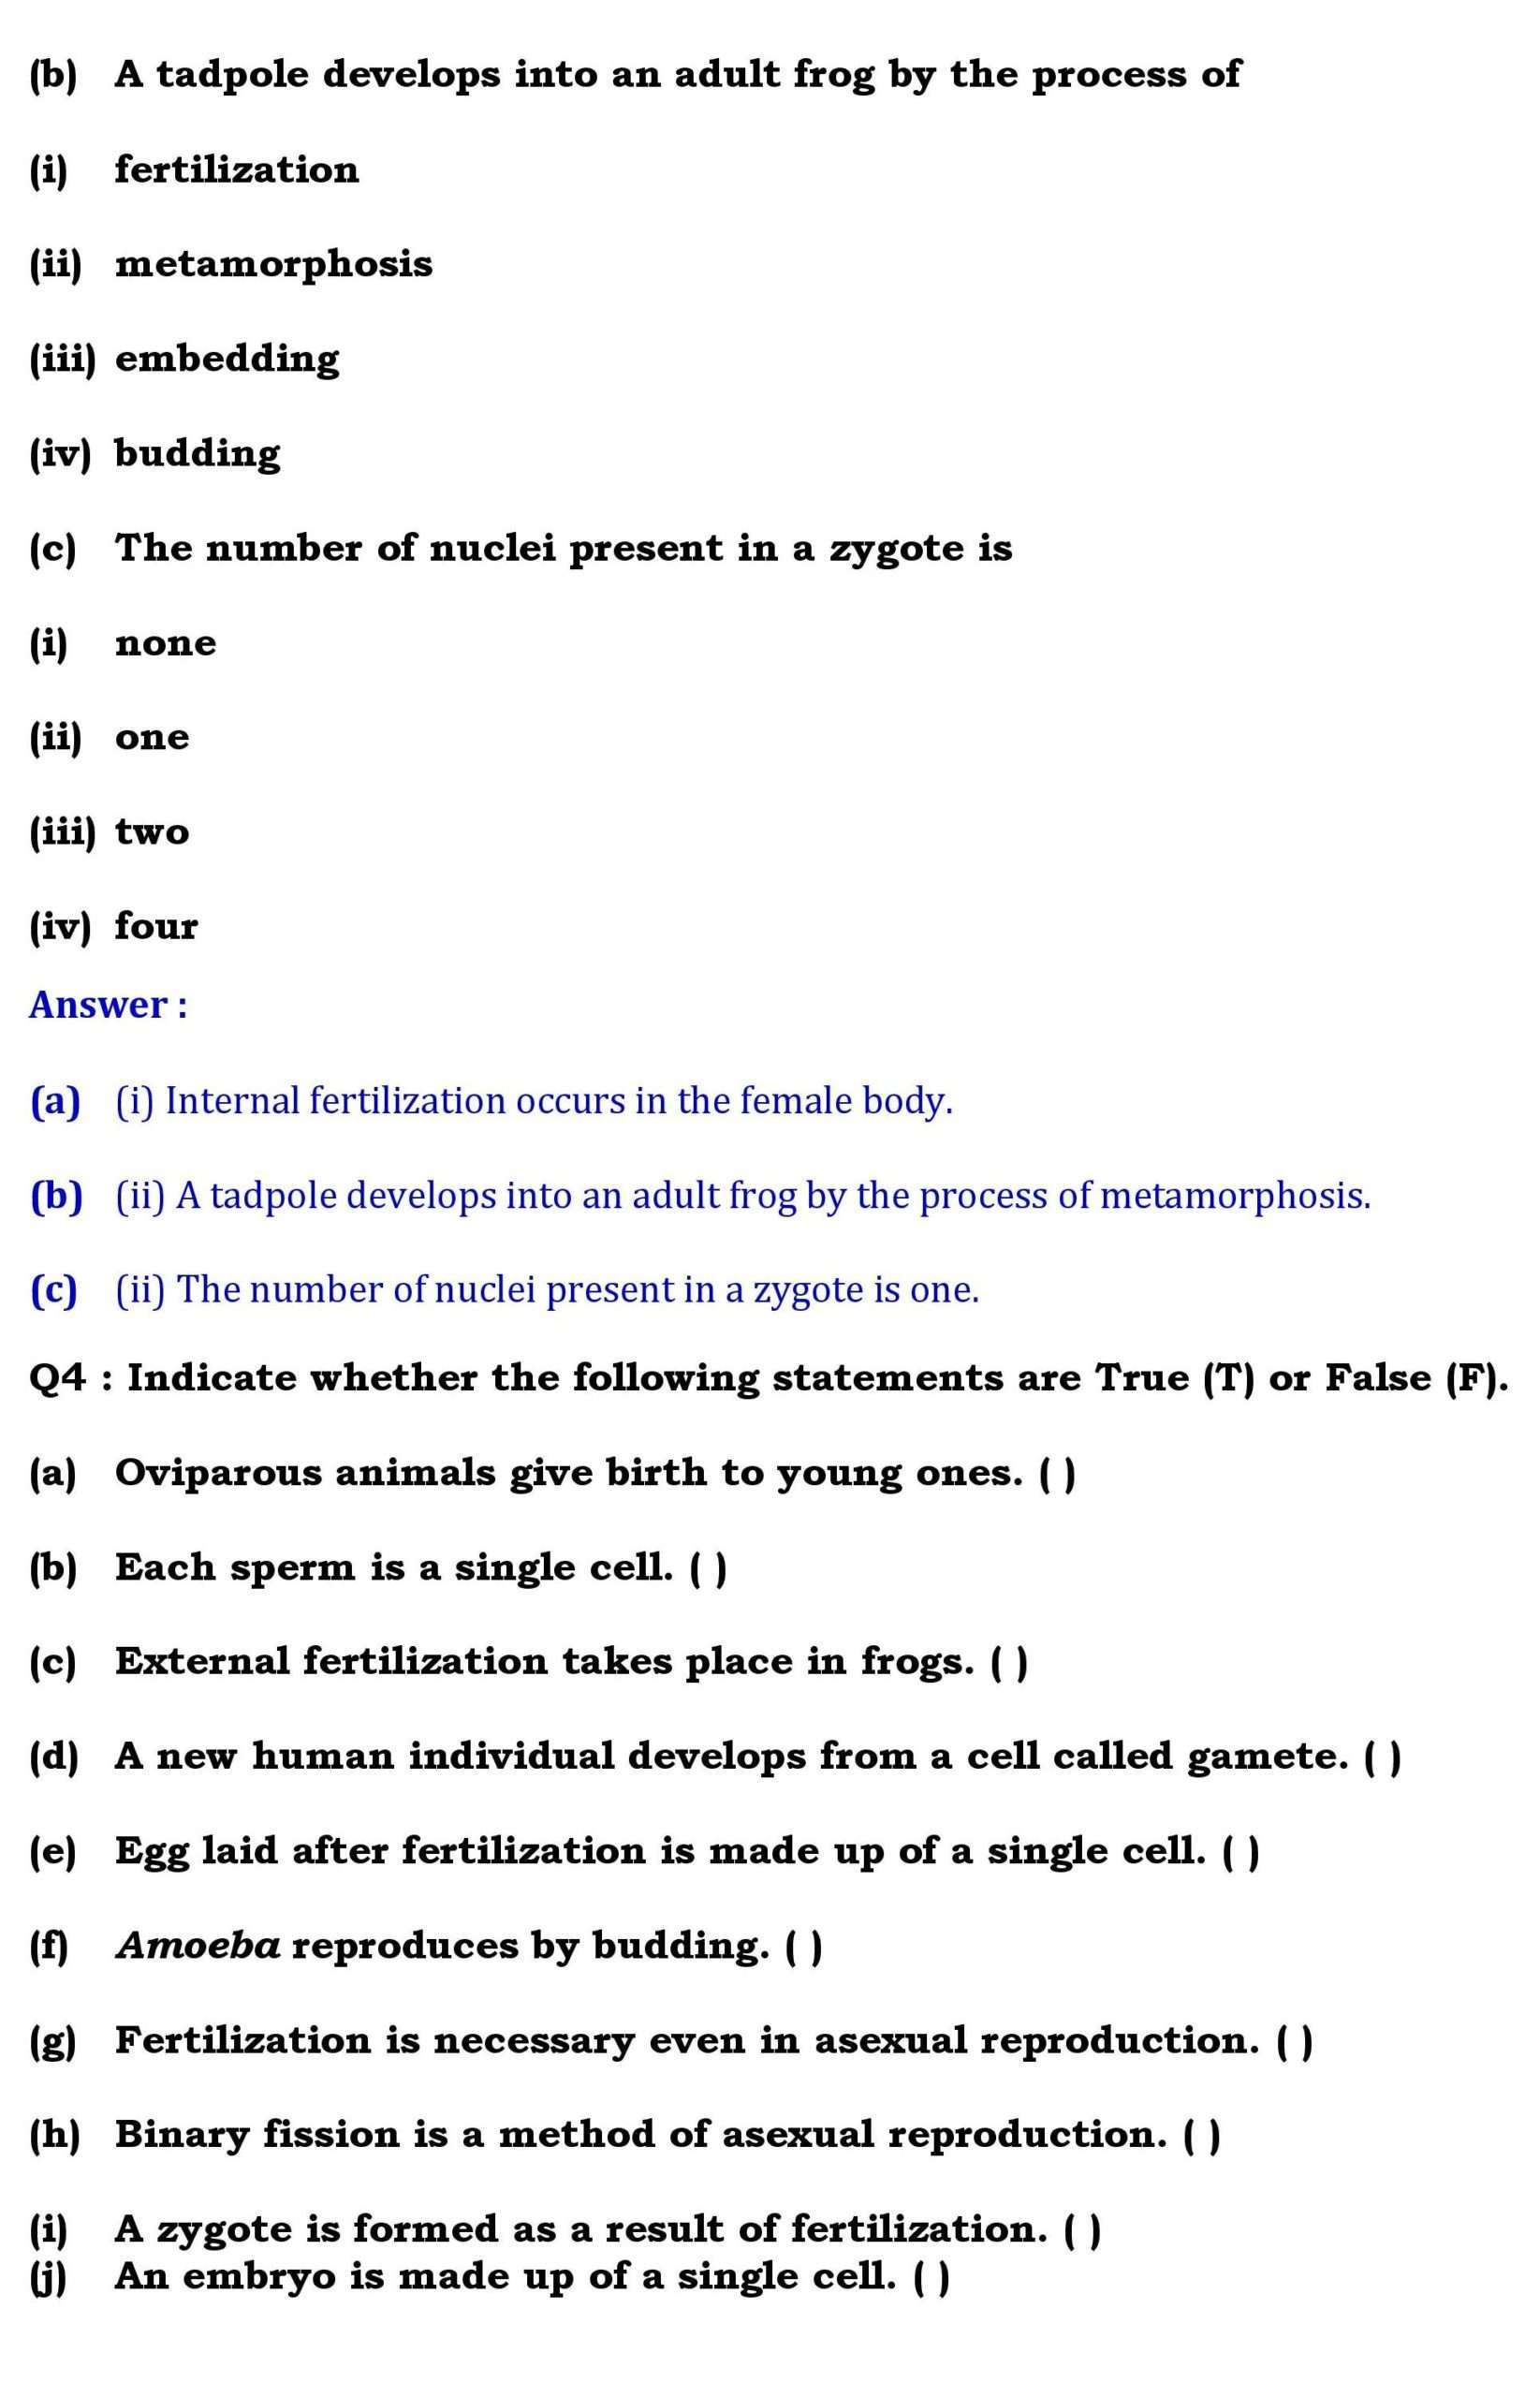 Ch-9 Reproduction in Animals- Page wise NCERT Solution